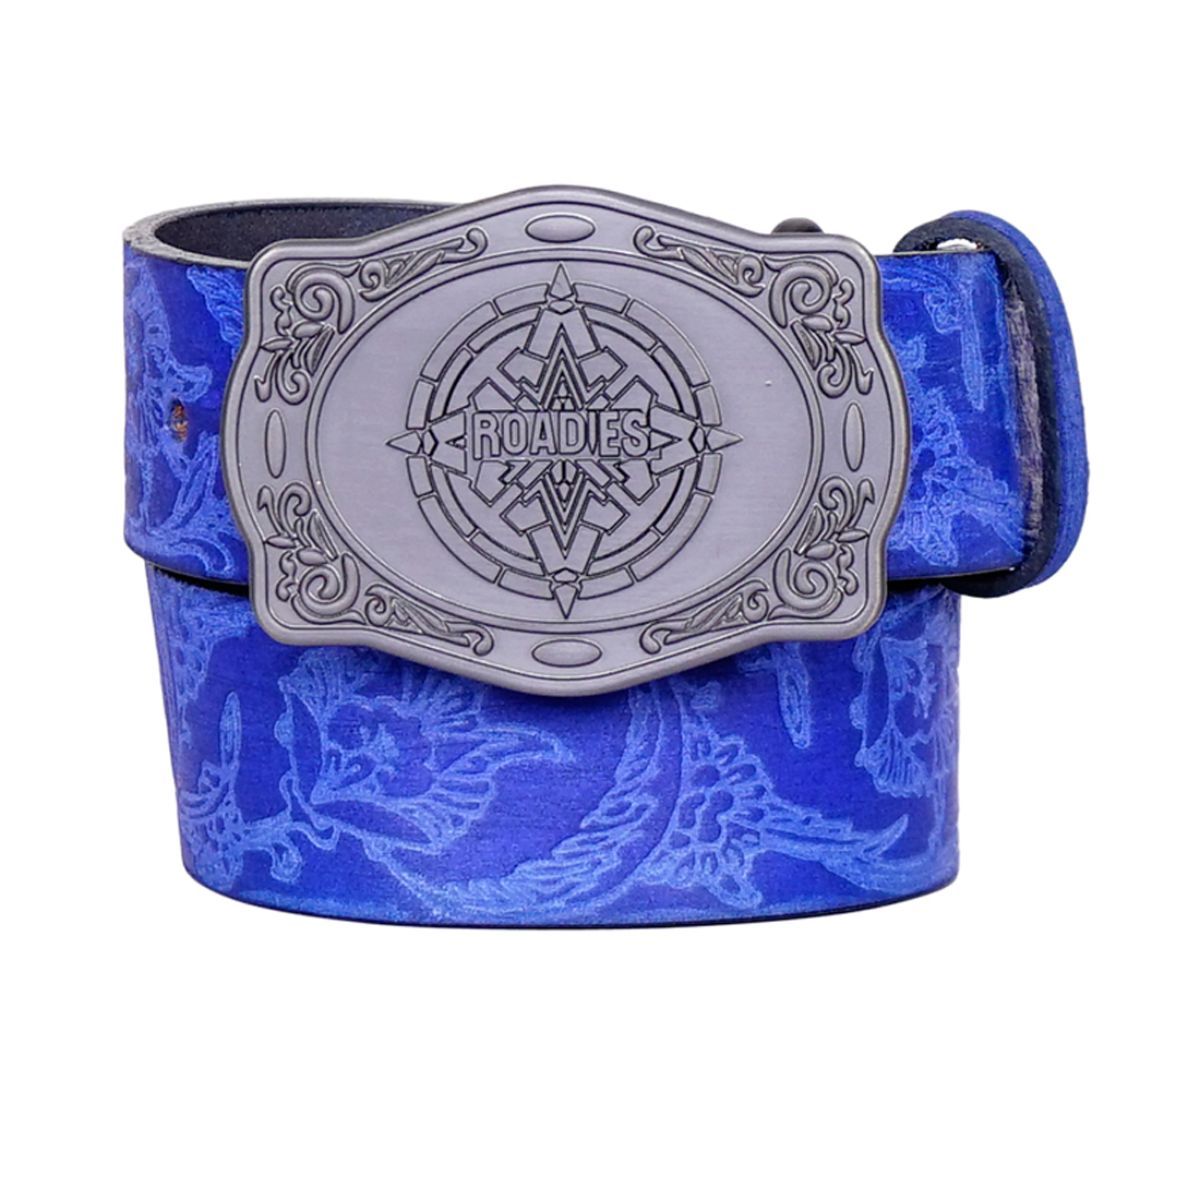 Justanned Roadies By Floral Blue Classic Men'S Leather Belt (38)